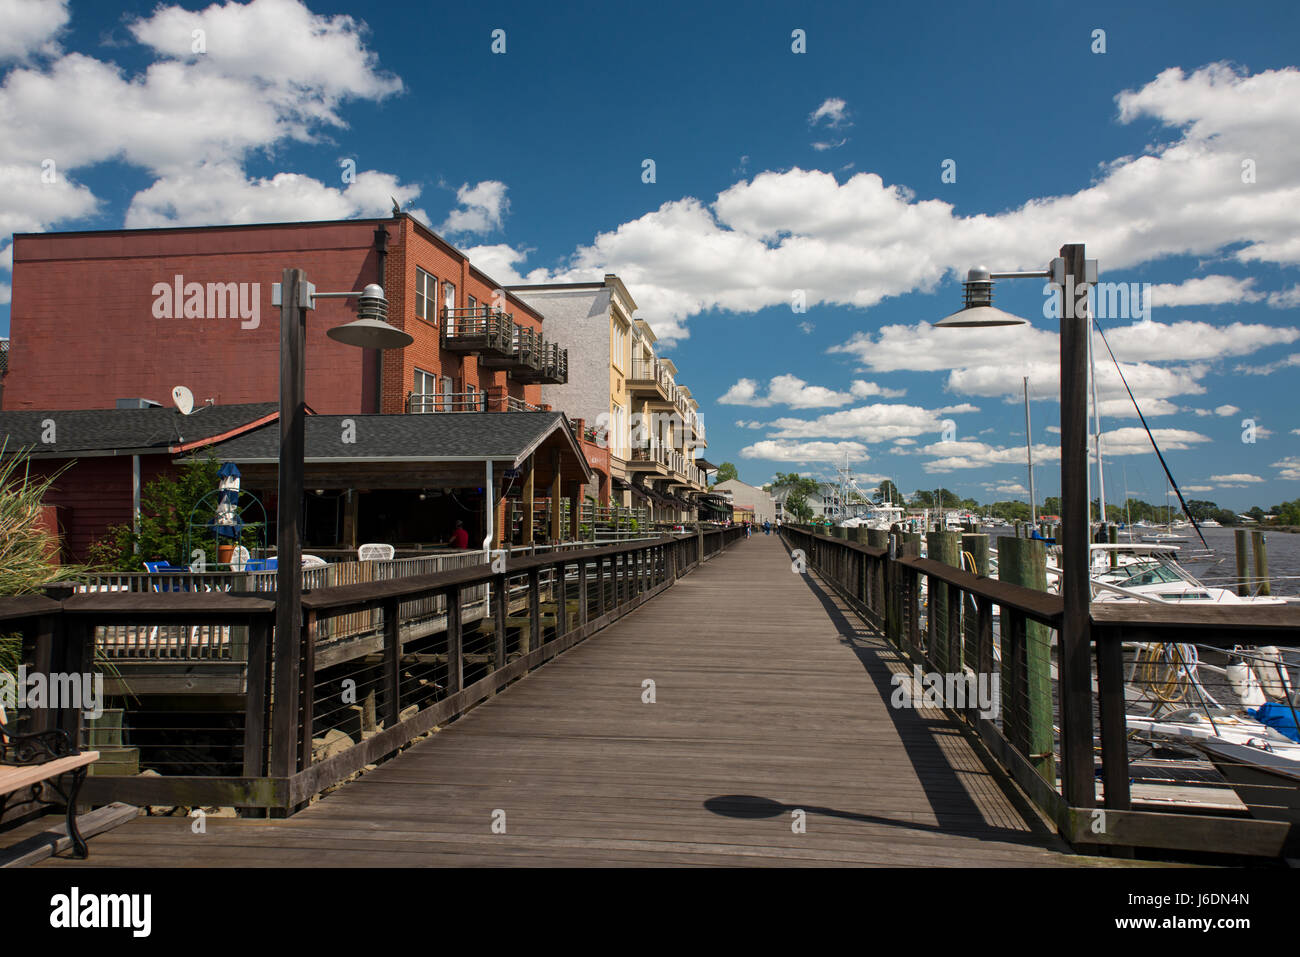 South Carolina, historic port city of Georgetown. The third oldest city in South Carolina, founded in 1729. Georgetown Harborwalk along the Sampit Riv Stock Photo